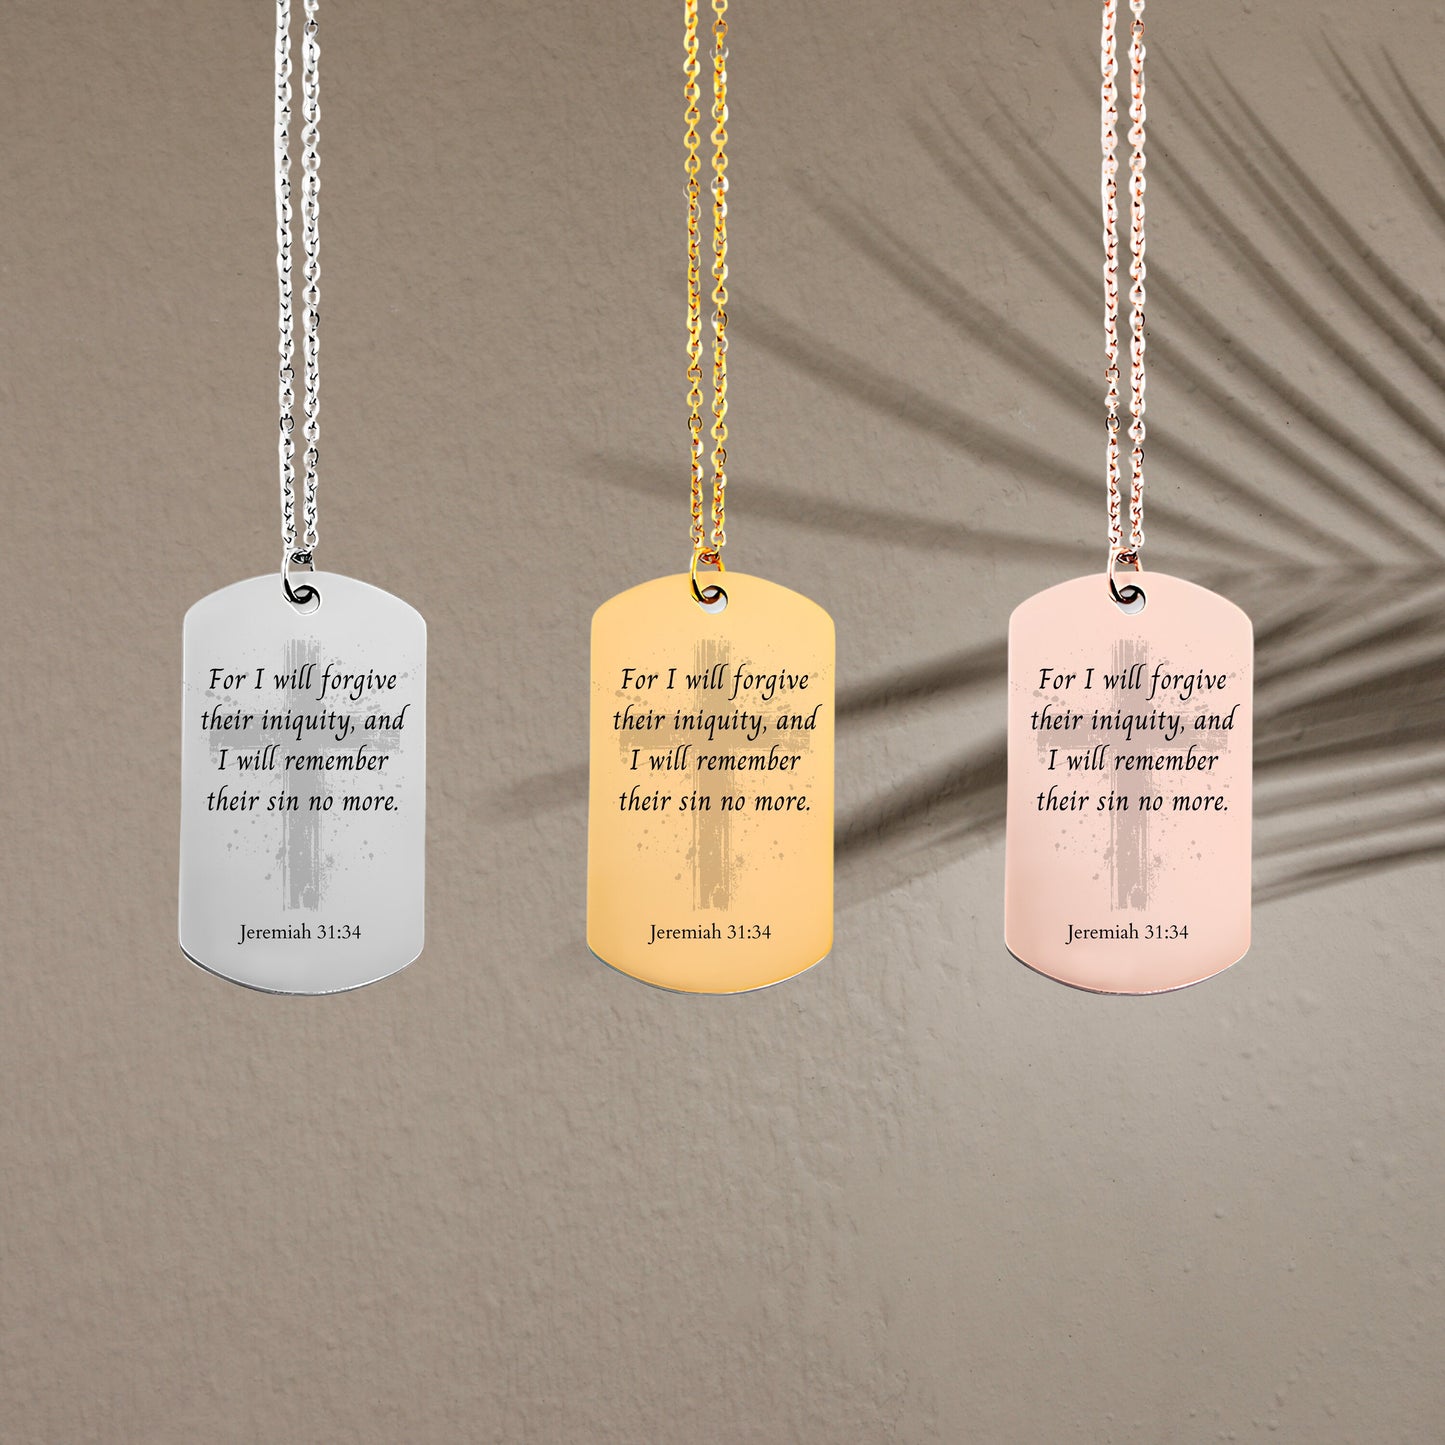 Jeremiah 31 34 quote necklace, gold bible verse, 14k gold cross charm necklace, confirmation gift, gold bar tag necklace,religious scripture